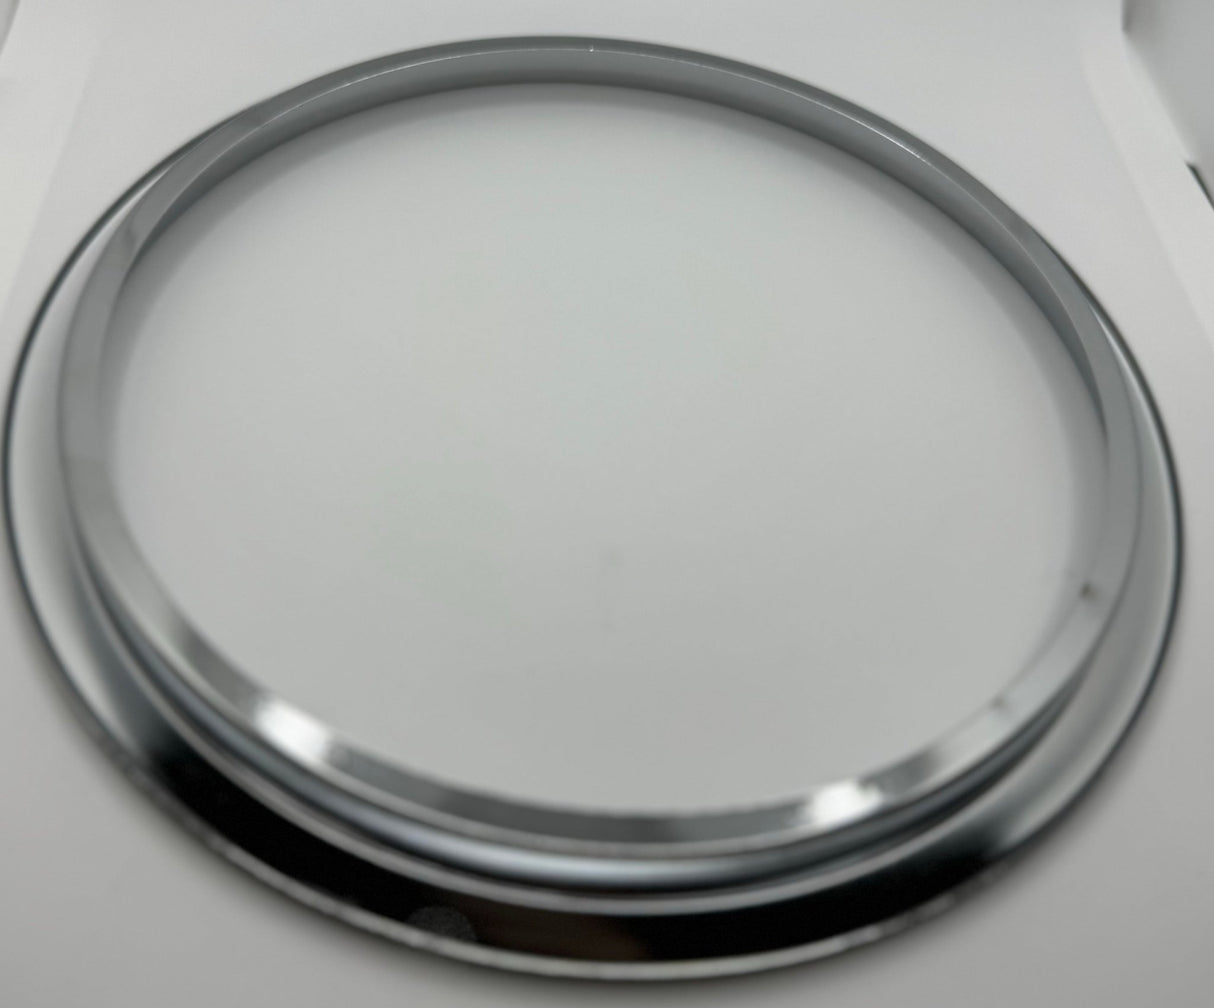 ELECTROLUX LARGE TRIM RING 8" WESTINGHOUSE 230mm (2800) - My Oven Spares-Electrolux-2800-3